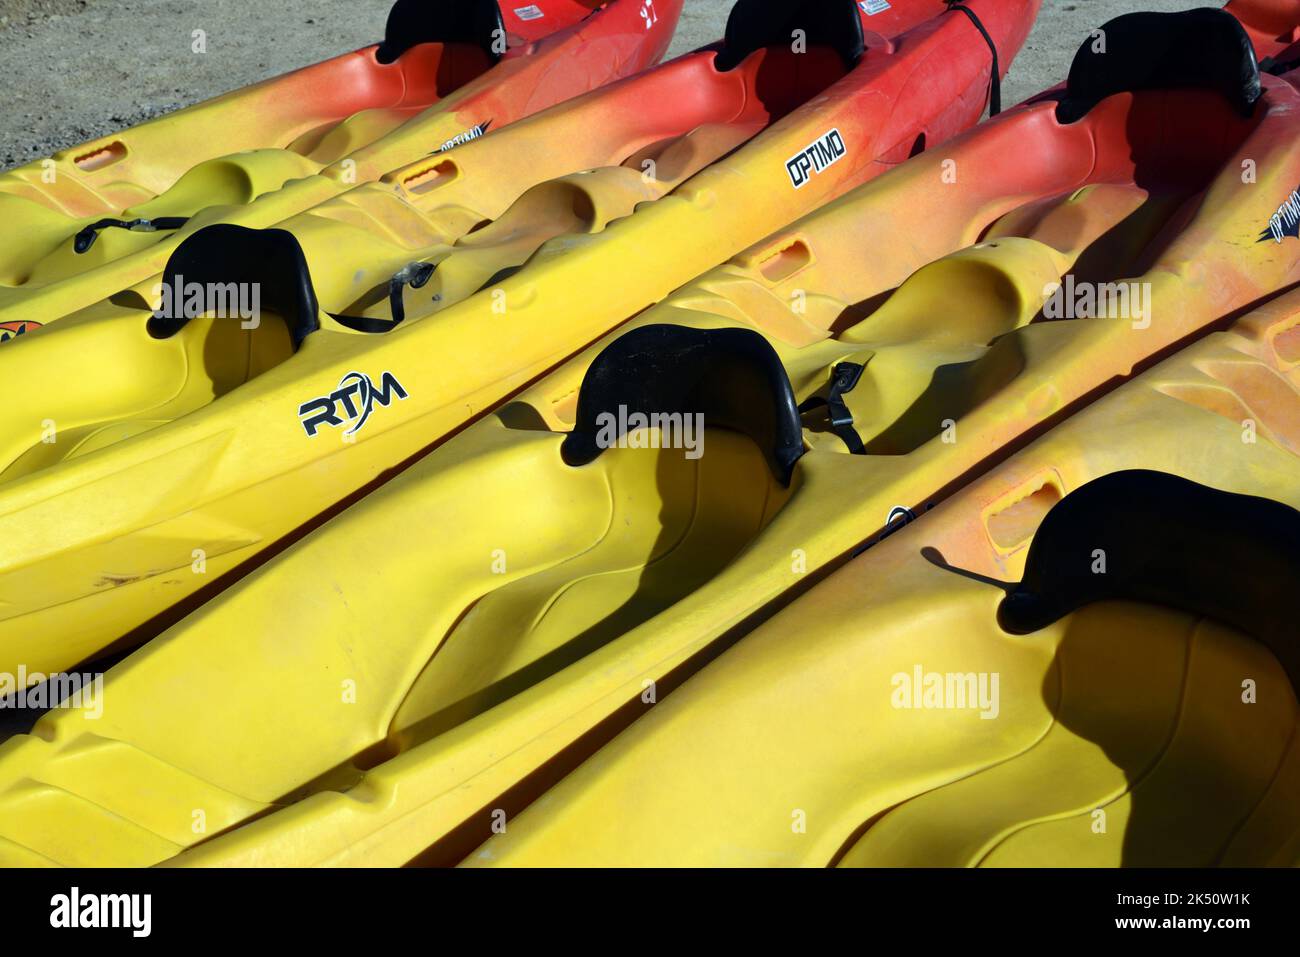 Row or Line of Plastic Yellow Canoes or Kayaks Stock Photo